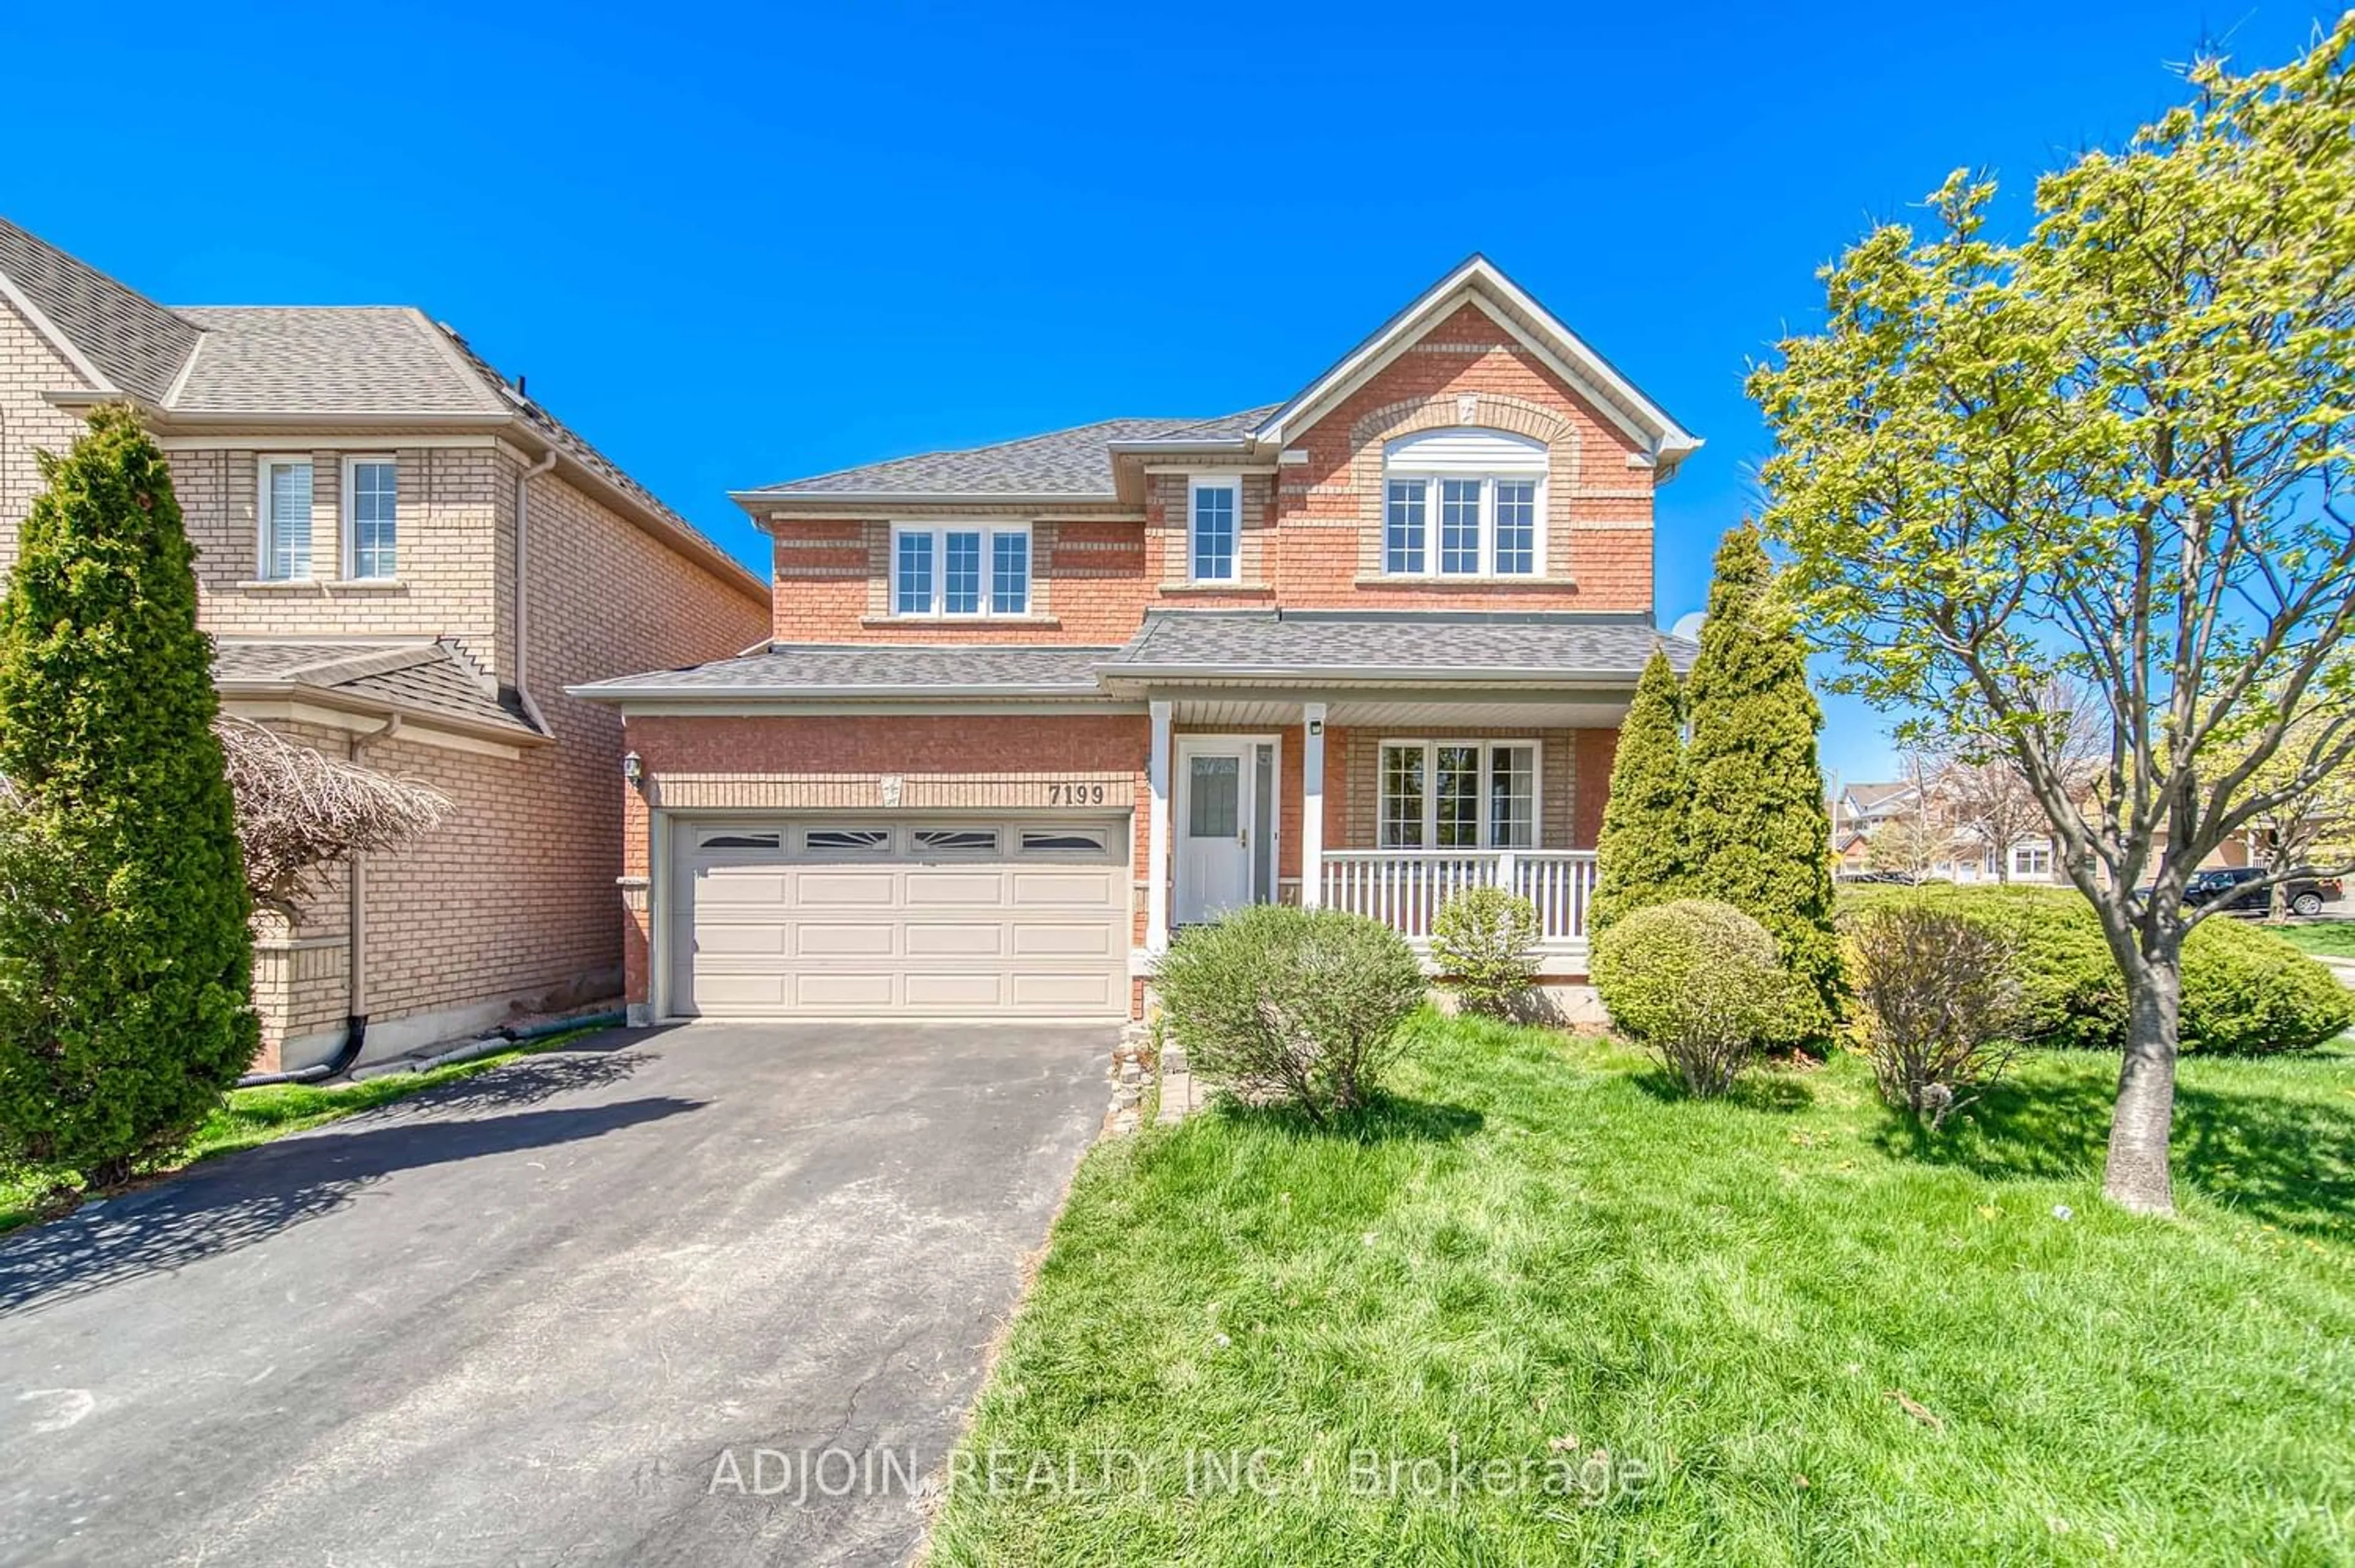 Frontside or backside of a home for 7199 Atwood Lane, Mississauga Ontario L5N 7X2